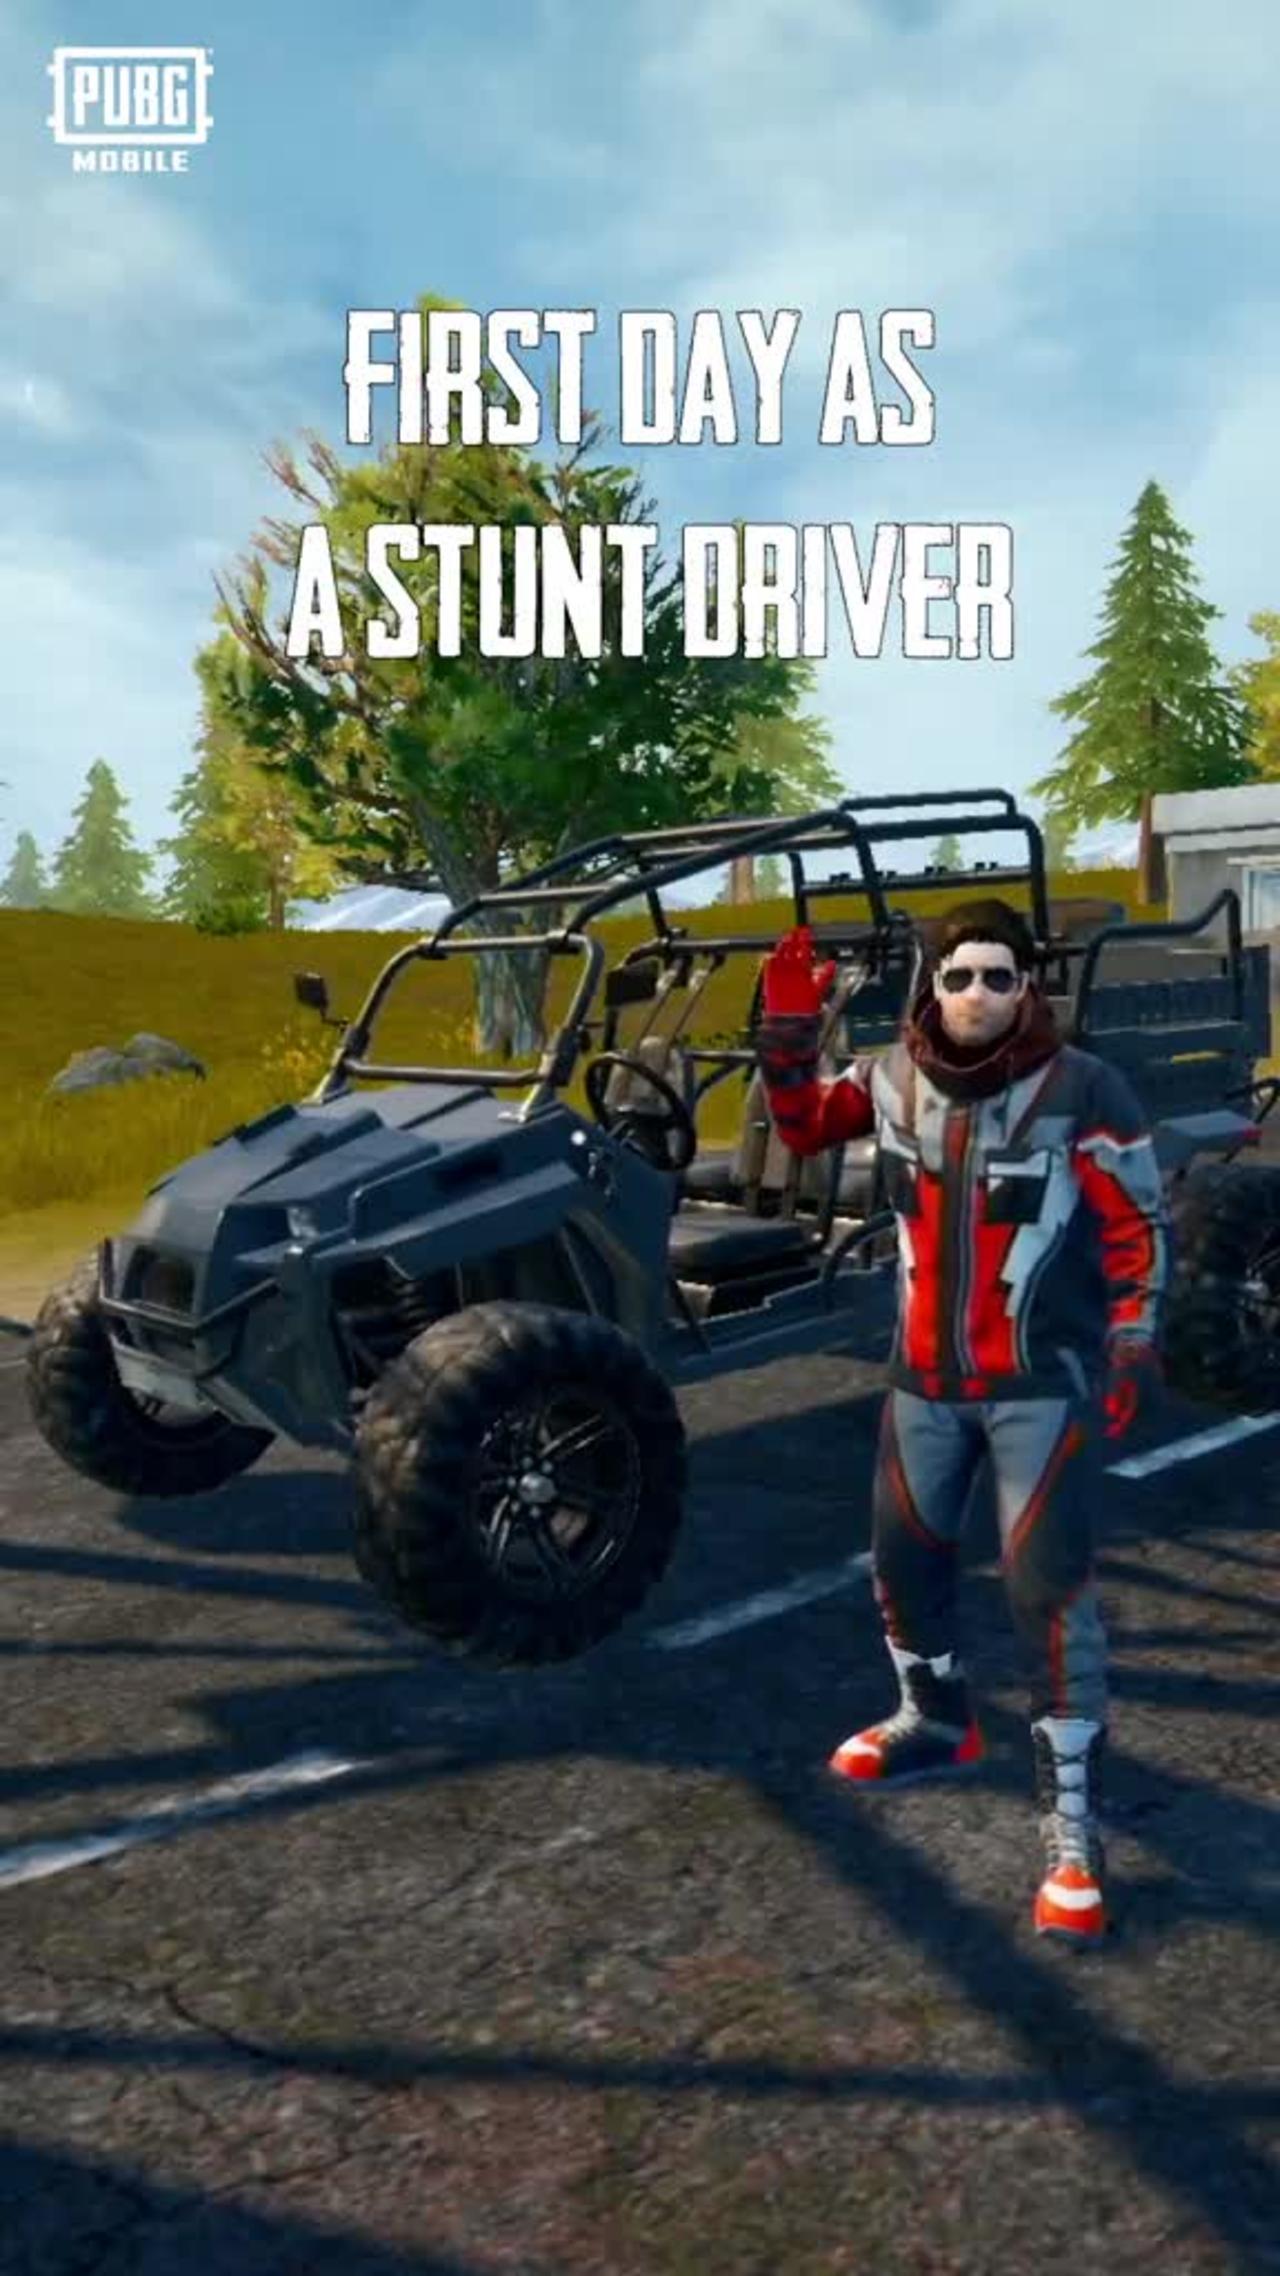 OK, maybe Stunt Driver wasn't the best choice. 😬 What crazy things do you like doing in